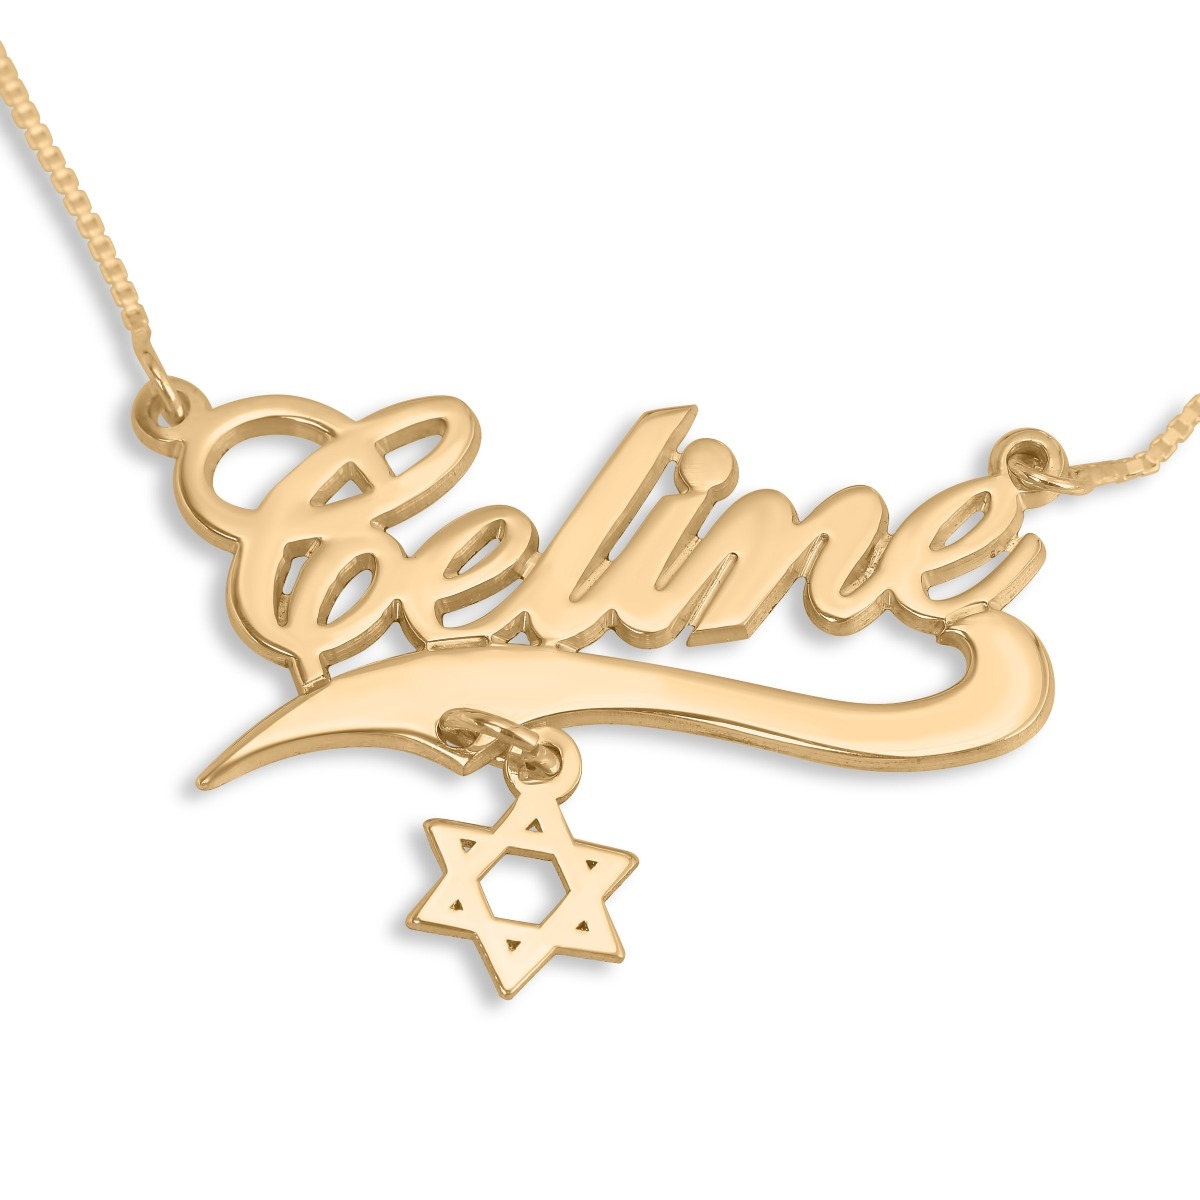 24K Gold-Plated Customizable Name Necklace with Star of David Charm  - 1